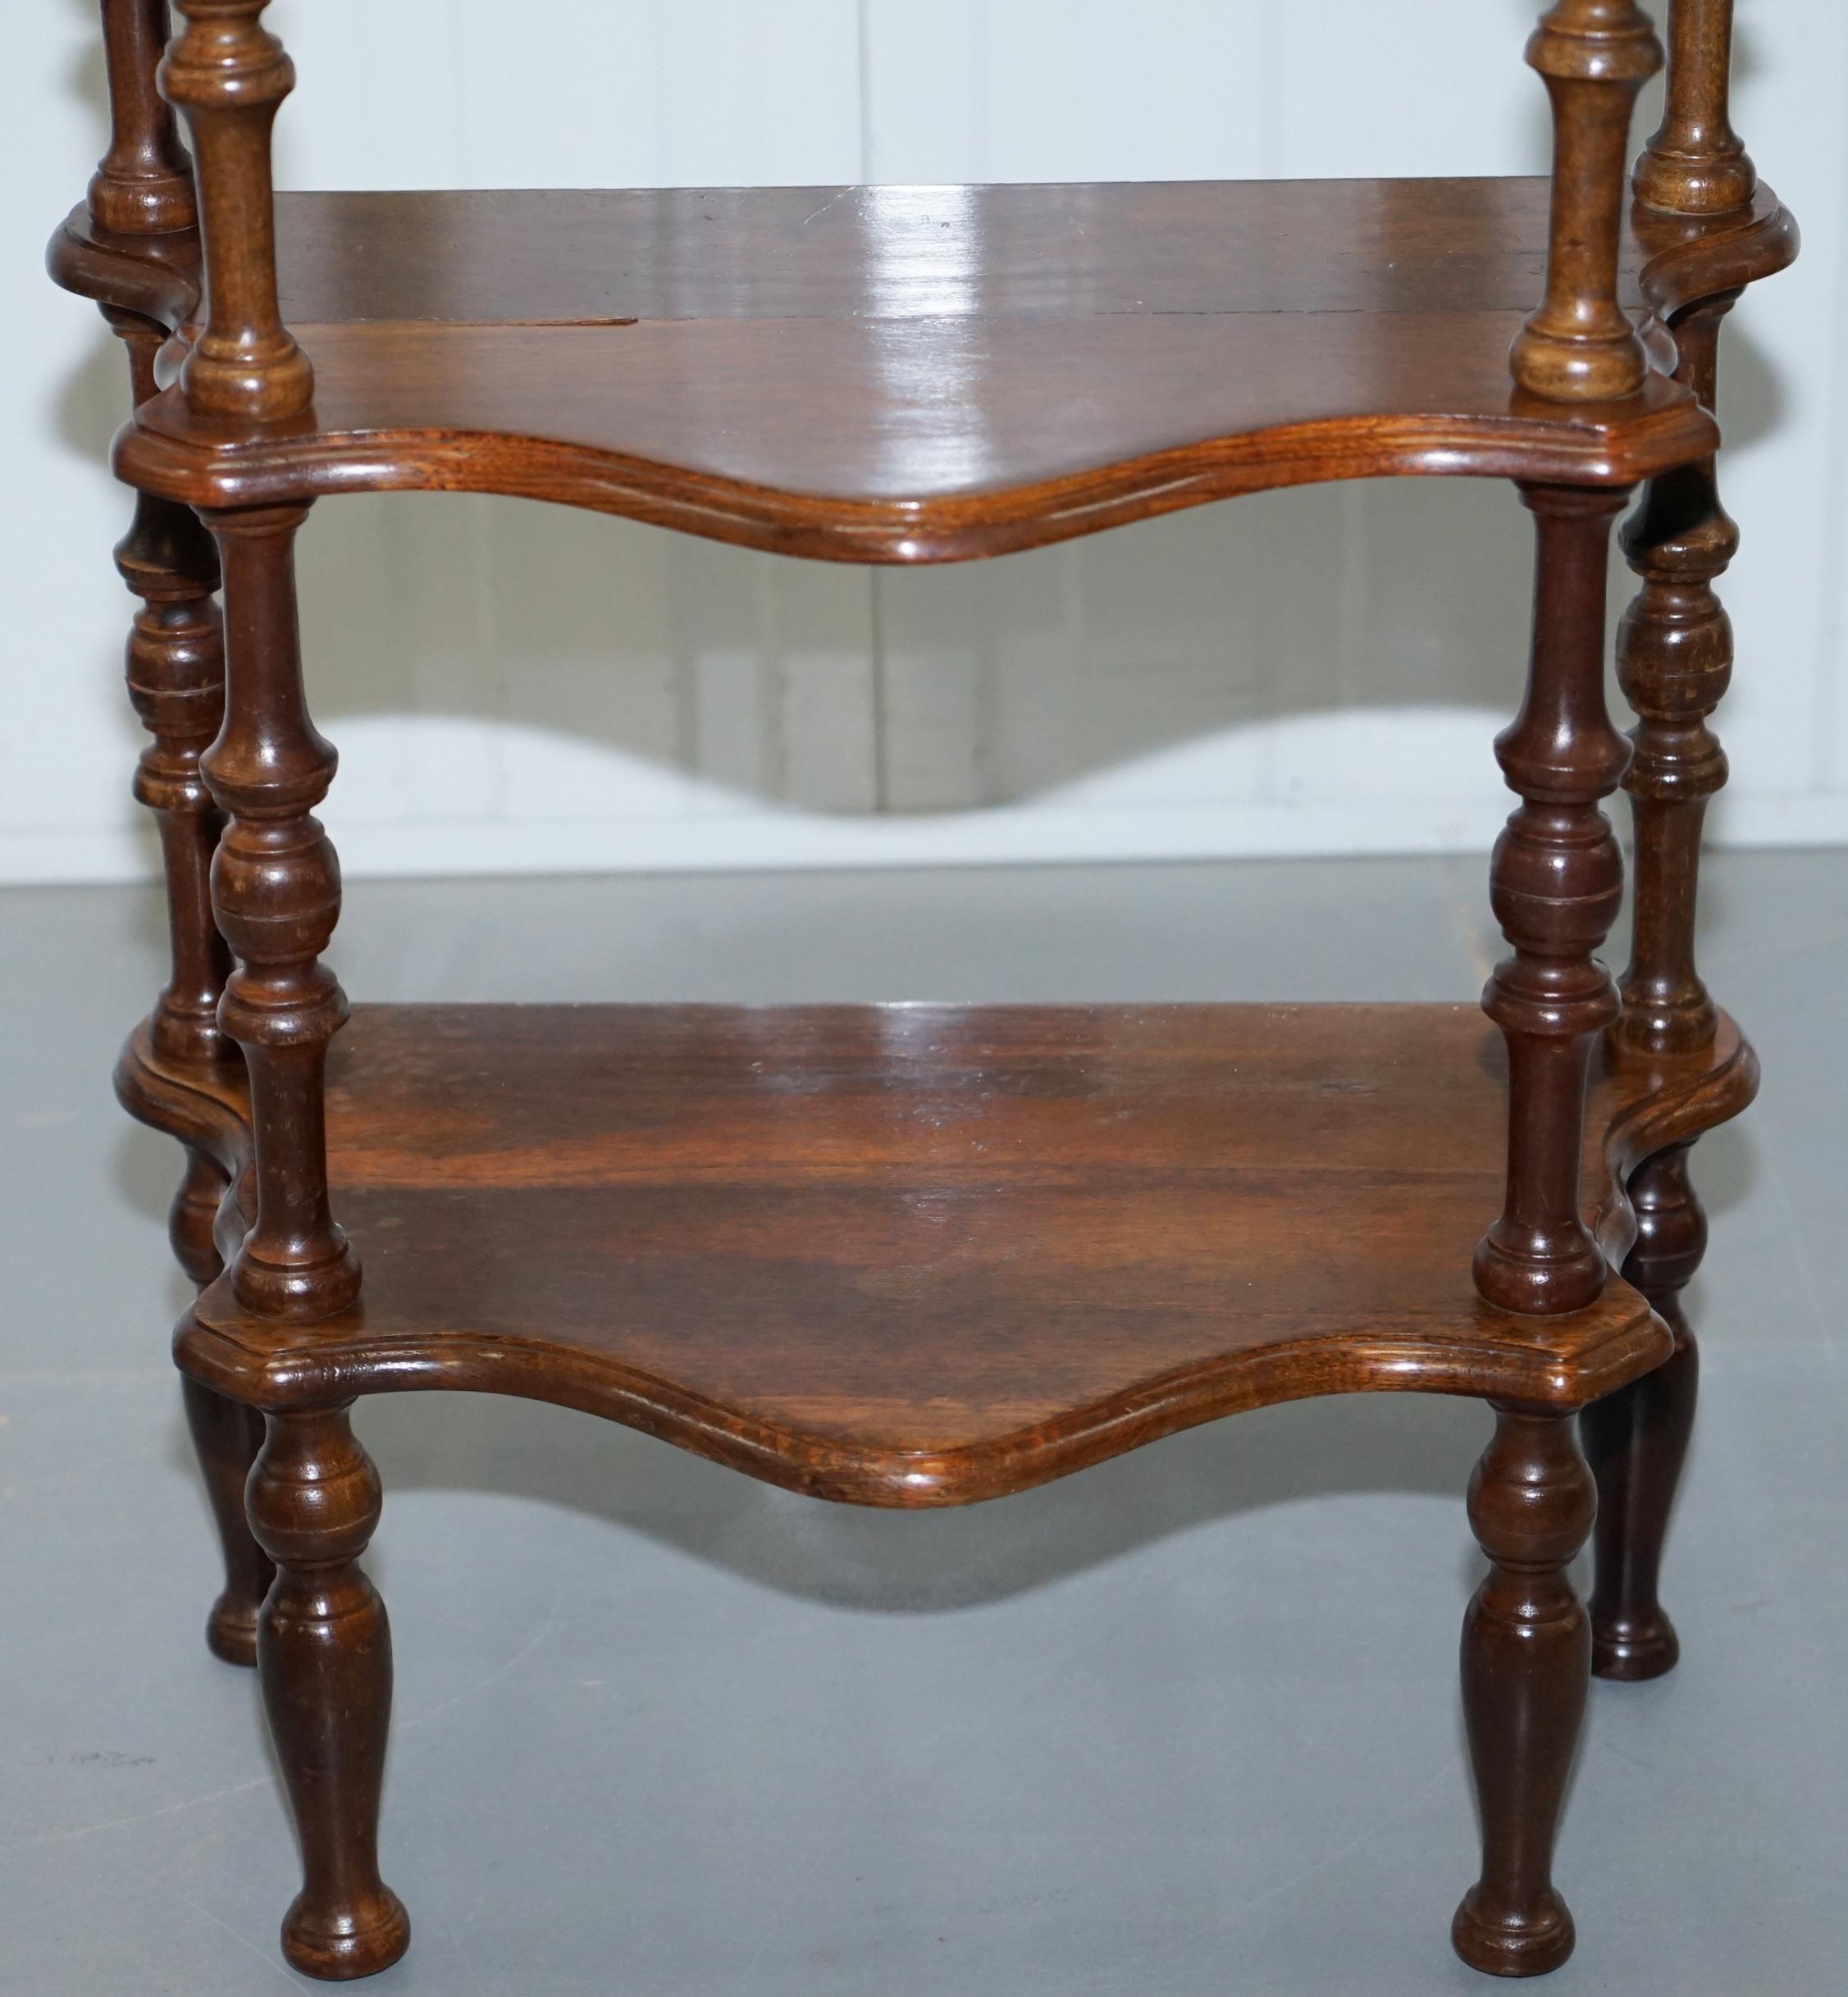 Lovely Small Mahogany Whatnot Bookcase Nicely Turned Pillars Functional Piece 2